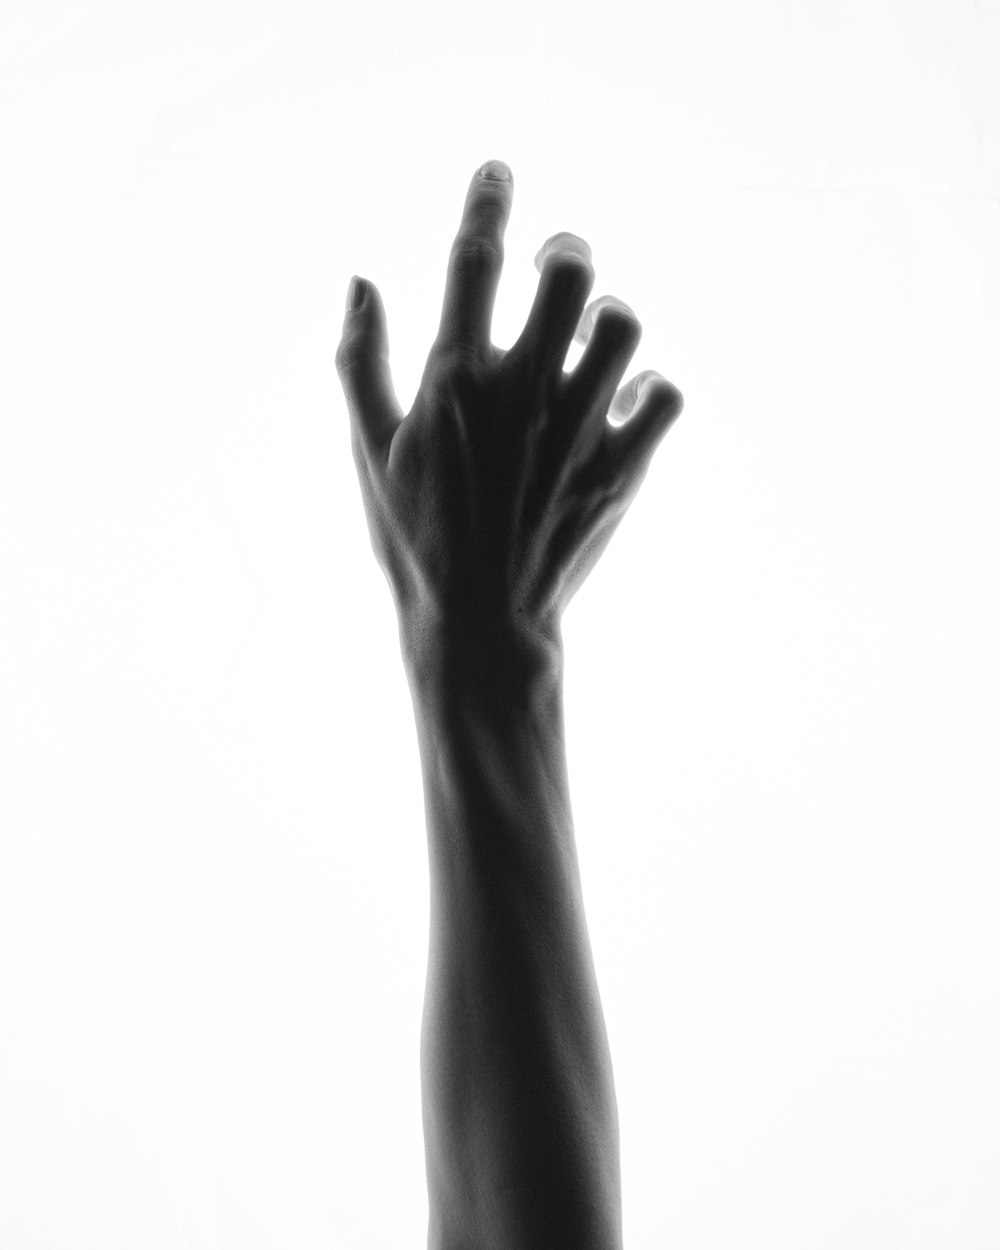 a black and white photo of a hand reaching up